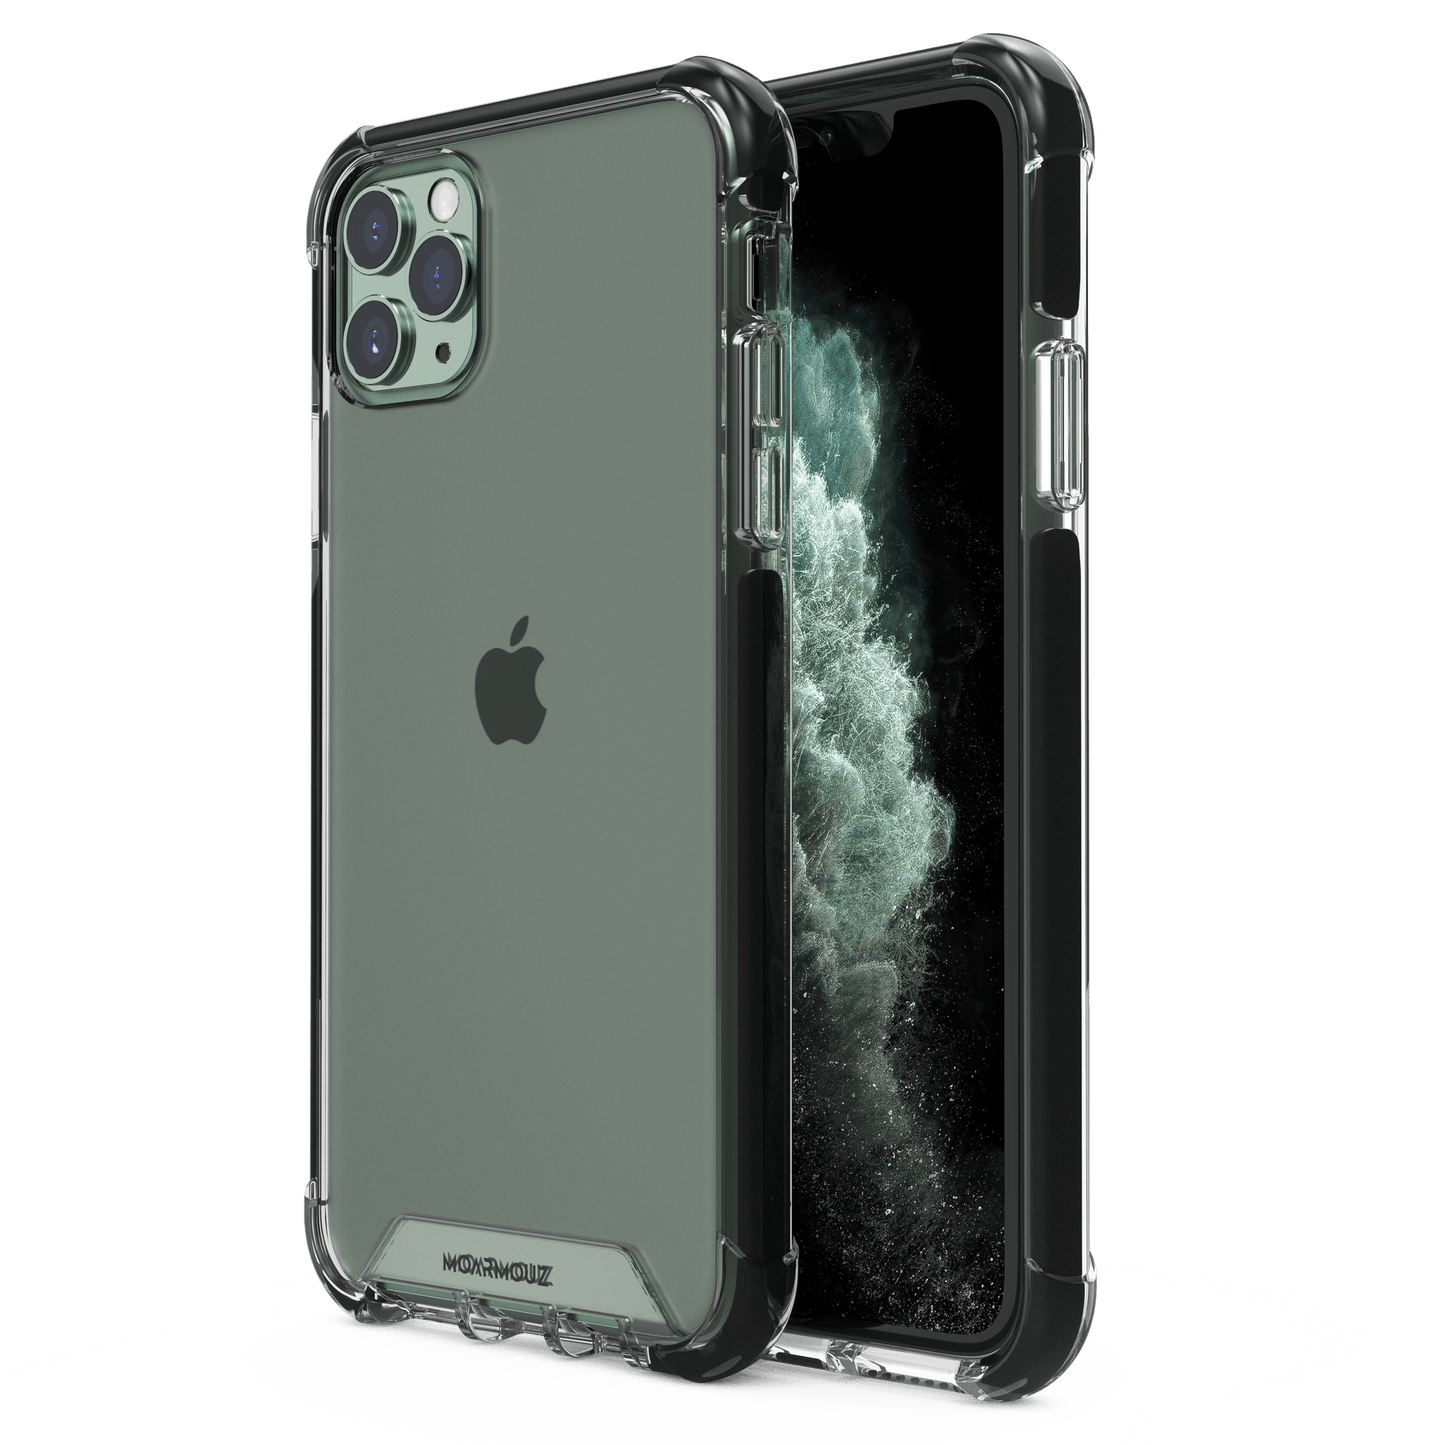 MoArmouz - Shockproof Case for iPhone 11 Pro Max